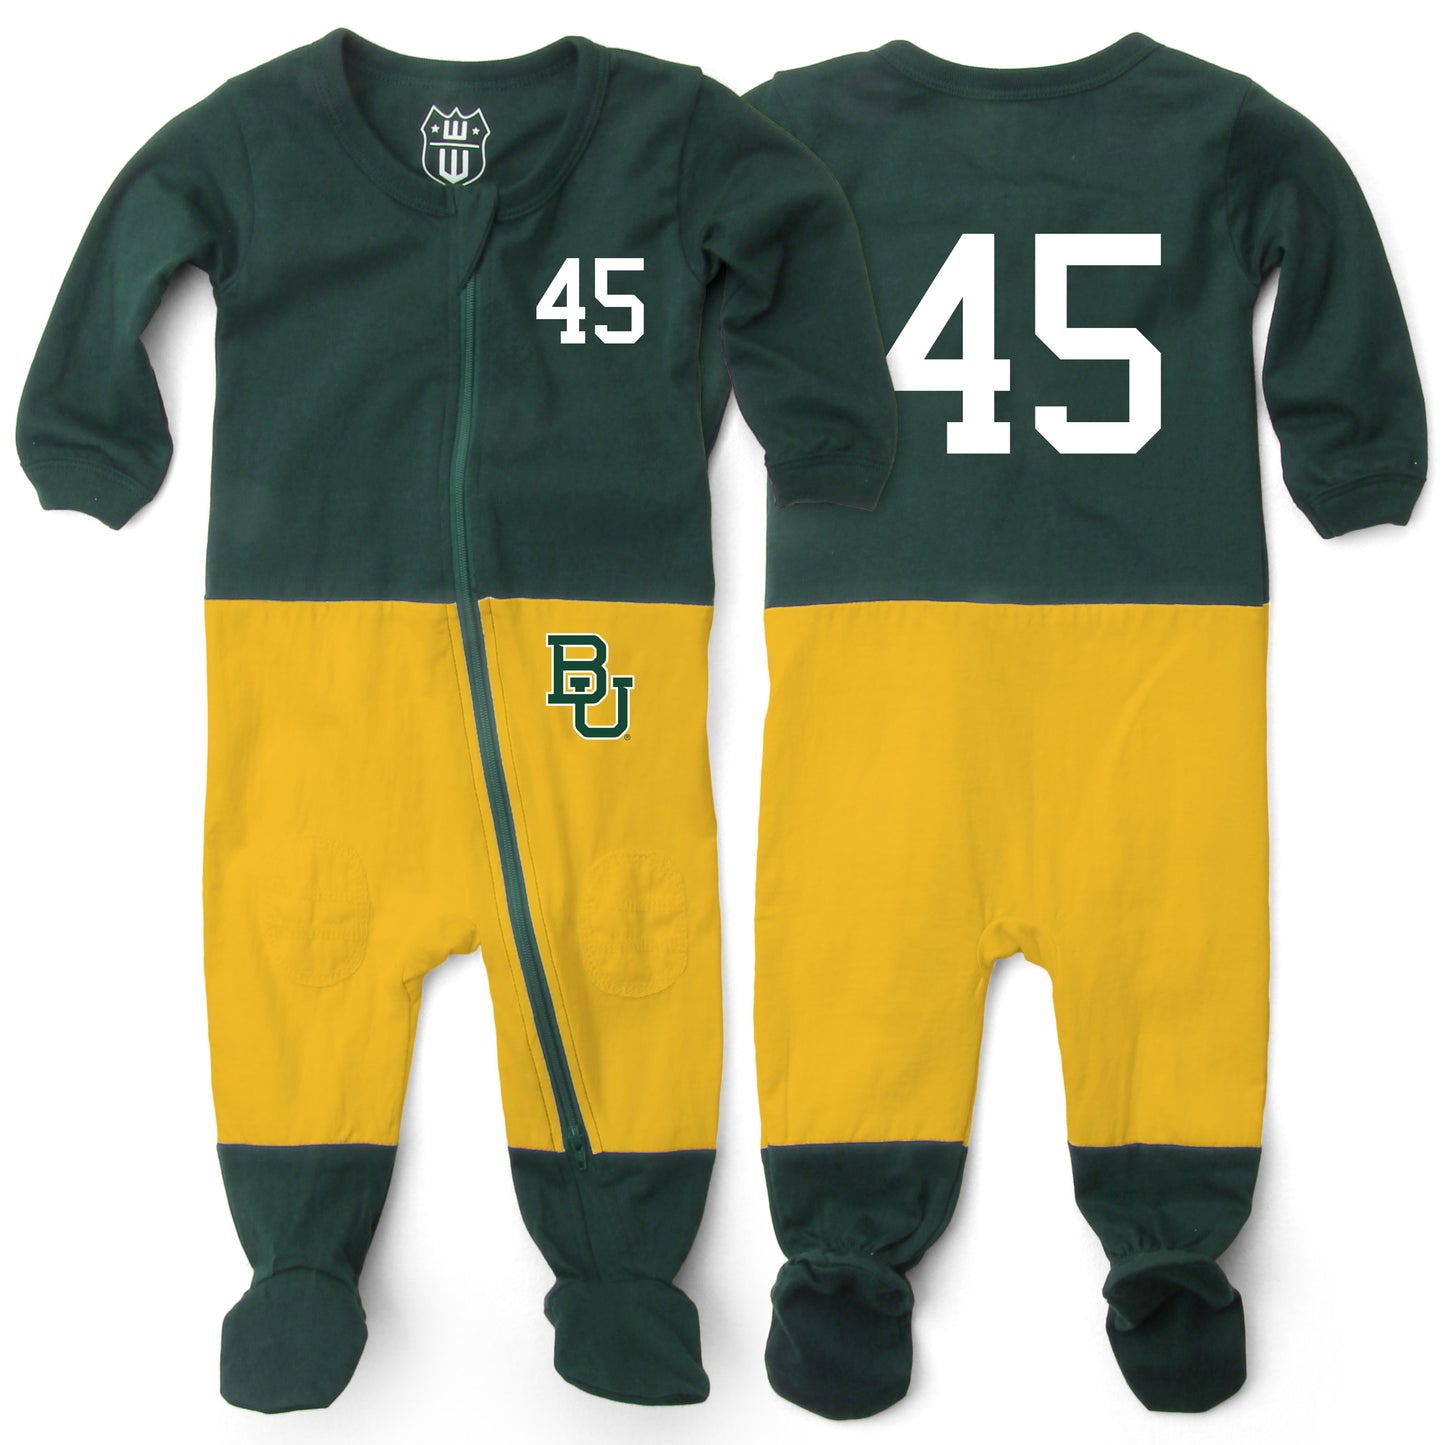 Wes & Willy  Baylor Bears Football PJ Infant Footie